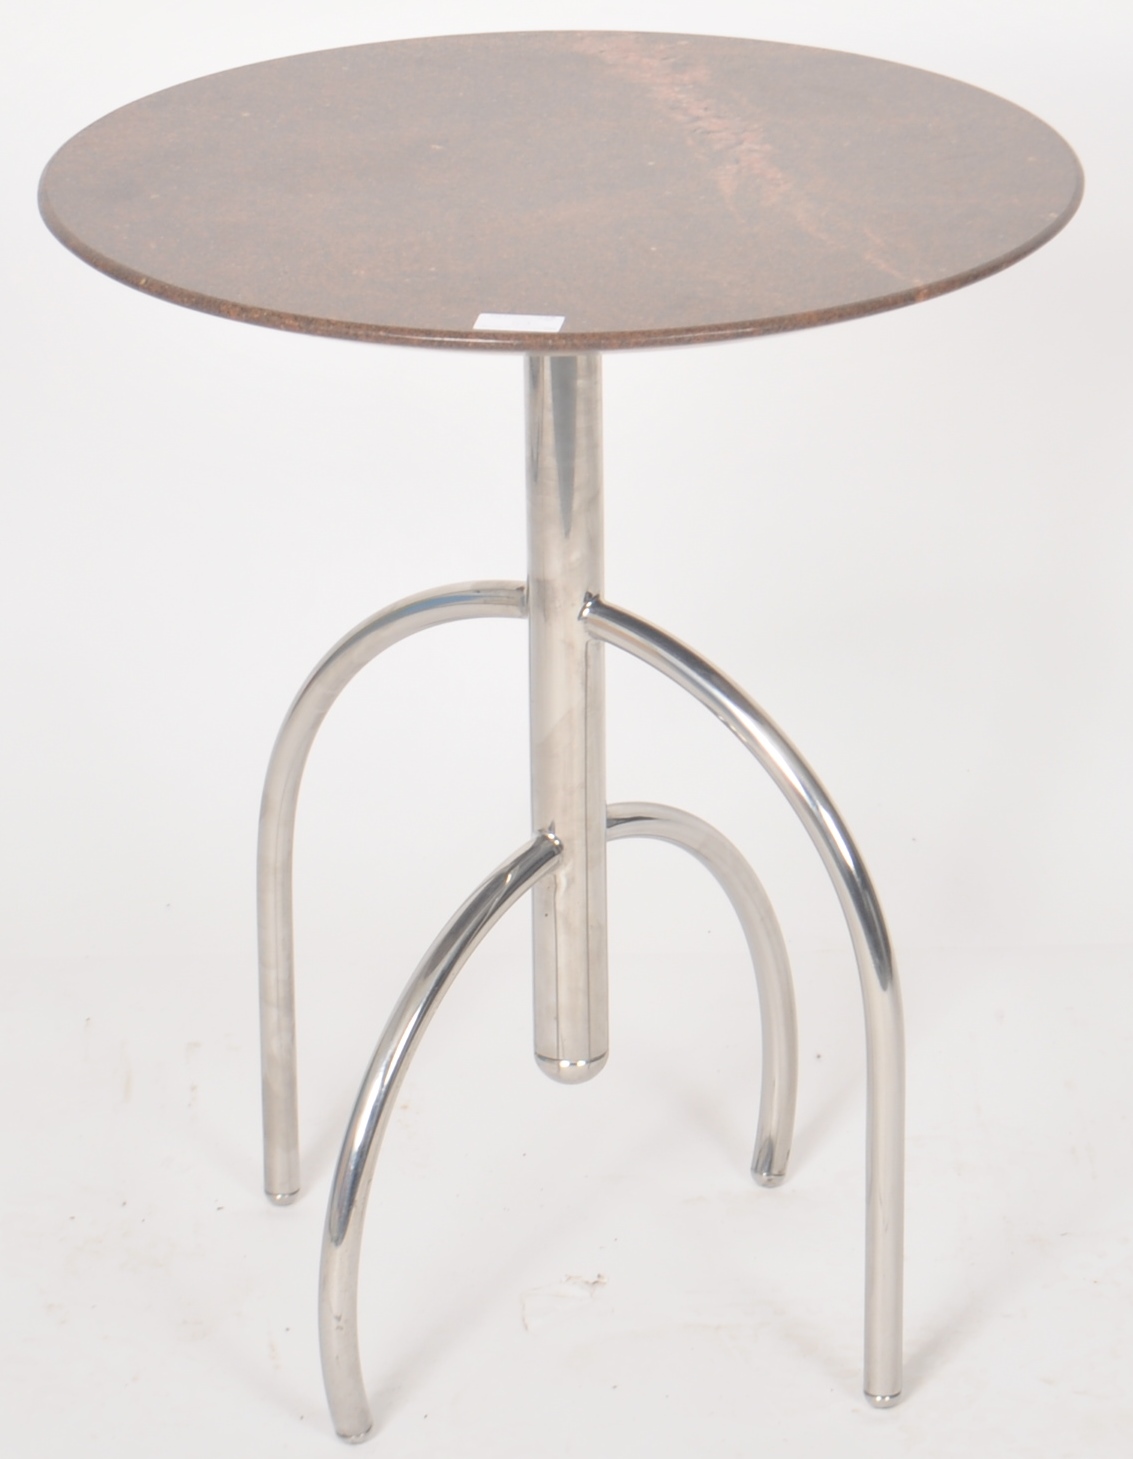 KNOLL STUDIO MANNER - CONTEMPORARY DESIGNER TABLE - Image 2 of 5